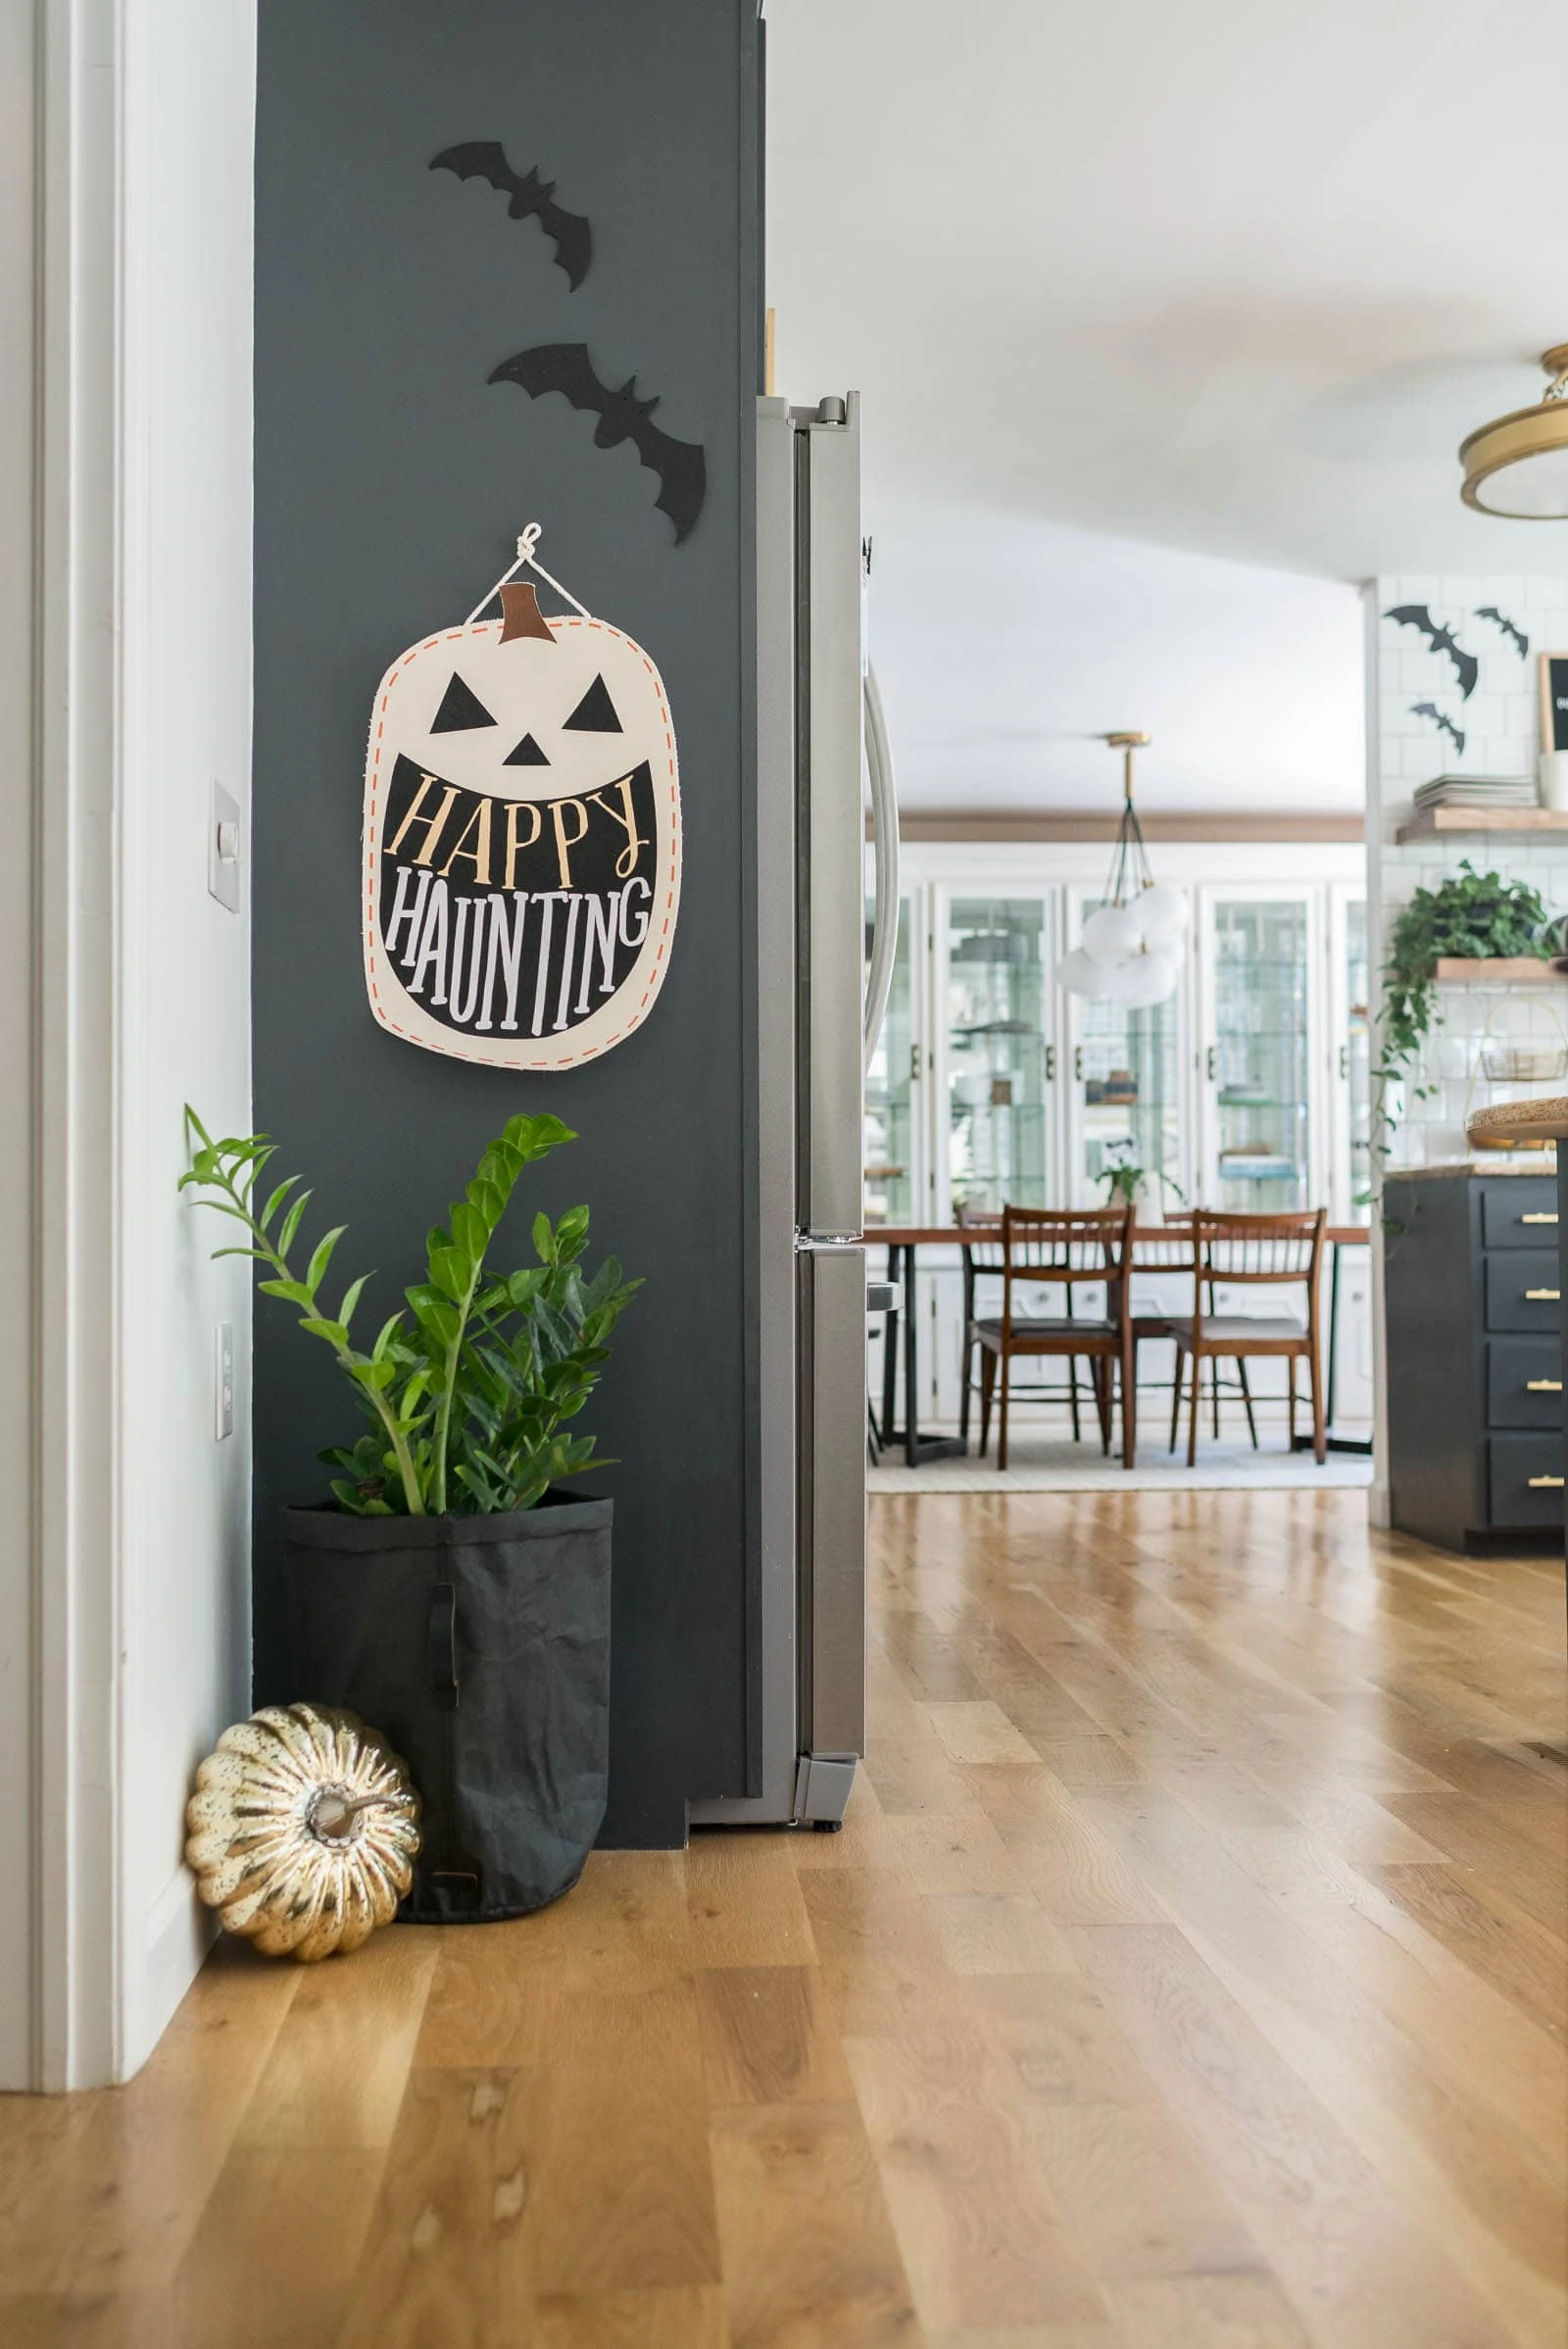 Pops of halloween in the kitchen